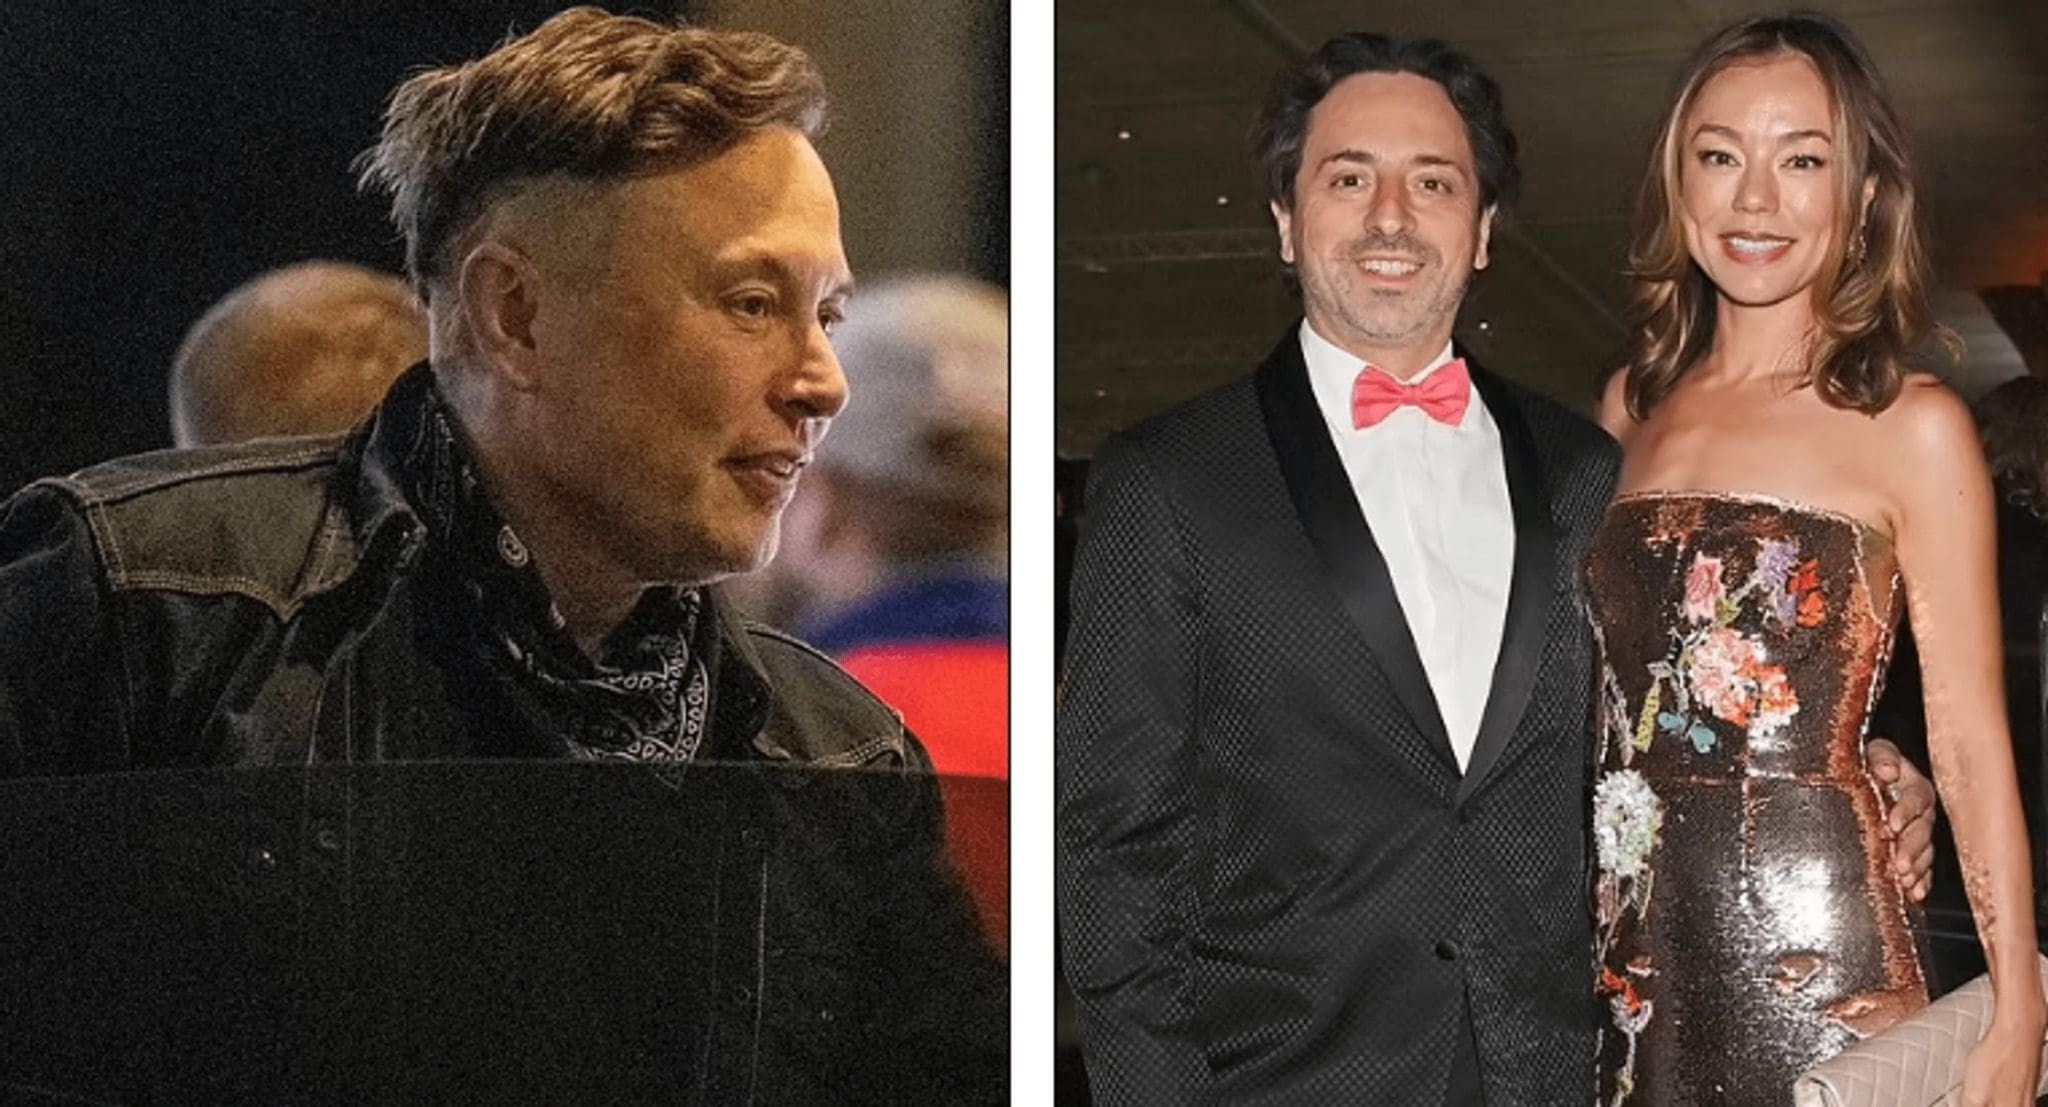 Google Co-Founder Sergey Brin's Marriage Was Ruined By Elon Musk